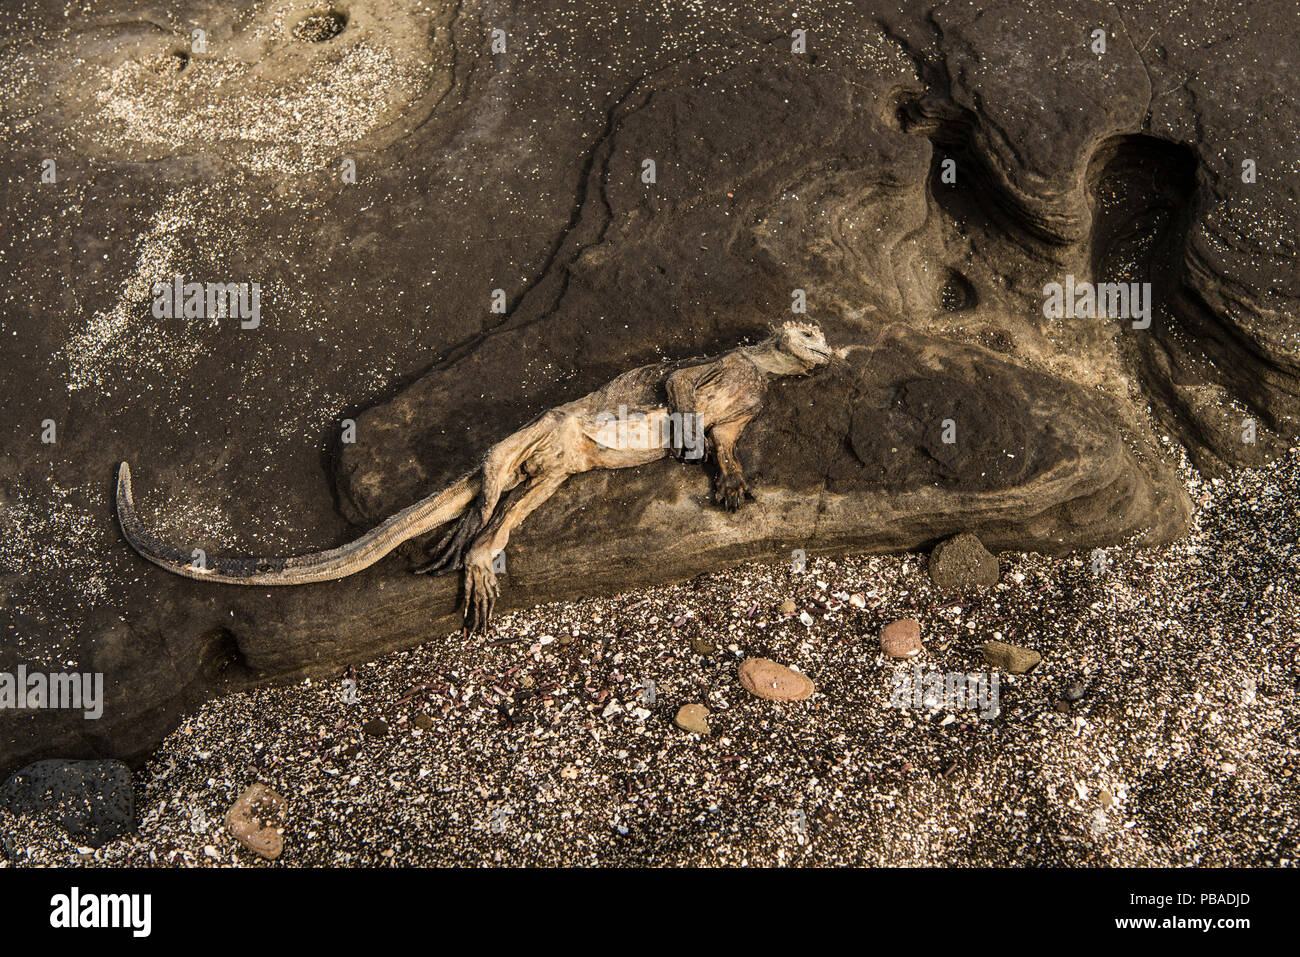 Dead Marine iguana (Amblyrhynchus cristatus) on the coastal rocks on Santiago Island, Galapagagos, April 2016. It probably died of starvation as much of the algae in the region have died off due to unusually warm El Nino waters. Stock Photo